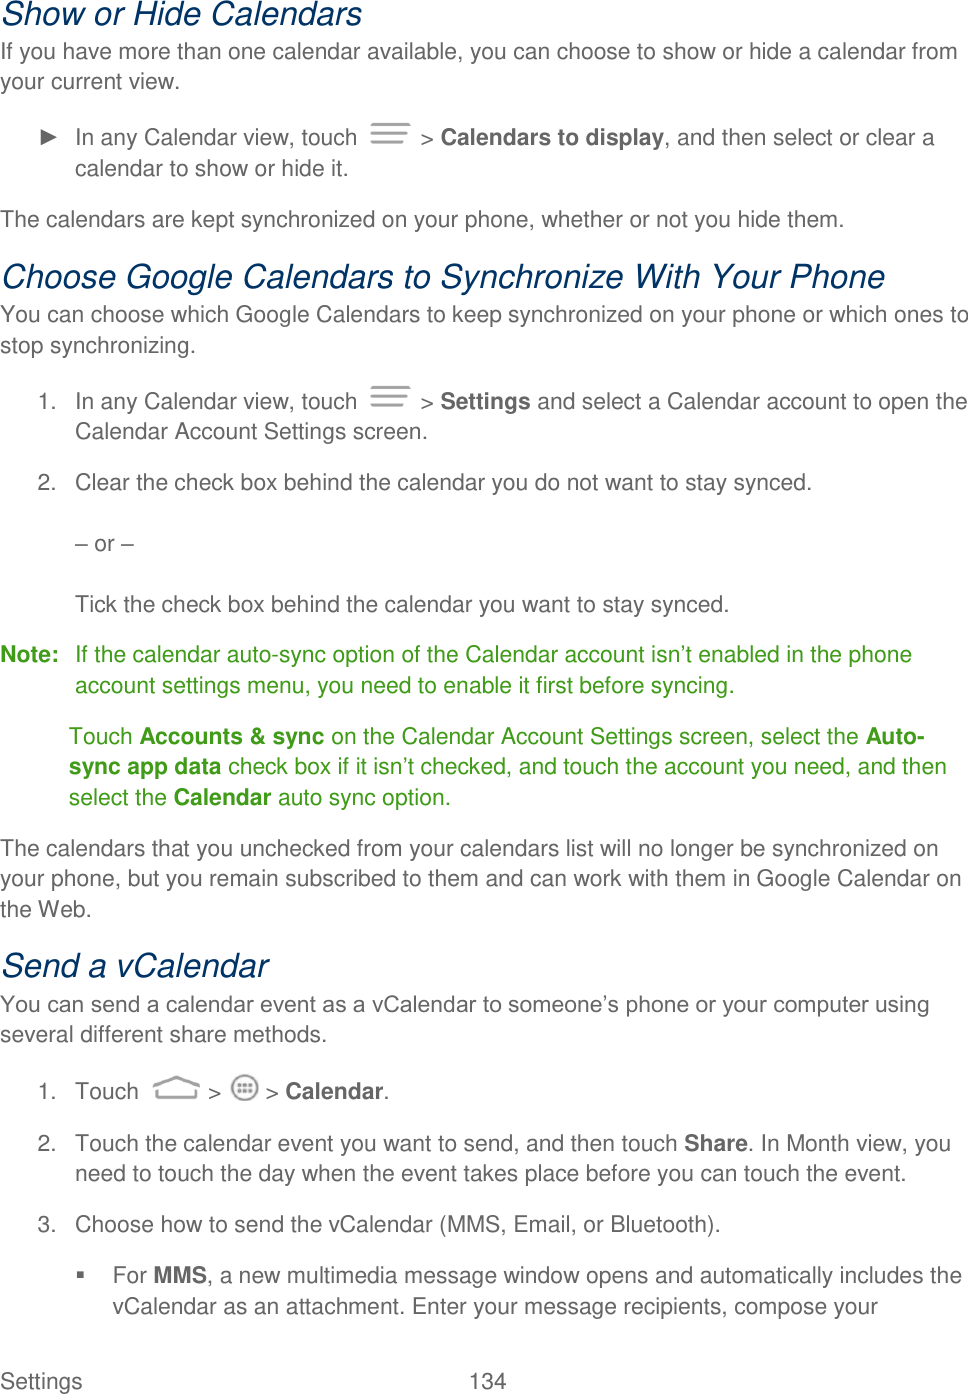 Settings    134 Show or Hide Calendars If you have more than one calendar available, you can choose to show or hide a calendar from your current view. ►  In any Calendar view, touch   &gt; Calendars to display, and then select or clear a calendar to show or hide it. The calendars are kept synchronized on your phone, whether or not you hide them. Choose Google Calendars to Synchronize With Your Phone You can choose which Google Calendars to keep synchronized on your phone or which ones to stop synchronizing. 1.  In any Calendar view, touch   &gt; Settings and select a Calendar account to open the Calendar Account Settings screen. 2.  Clear the check box behind the calendar you do not want to stay synced.  – or –  Tick the check box behind the calendar you want to stay synced. Note:  If the calendar auto-sync option of the Calendar account isn‟t enabled in the phone account settings menu, you need to enable it first before syncing.  Touch Accounts &amp; sync on the Calendar Account Settings screen, select the Auto-sync app data check box if it isn‟t checked, and touch the account you need, and then select the Calendar auto sync option. The calendars that you unchecked from your calendars list will no longer be synchronized on your phone, but you remain subscribed to them and can work with them in Google Calendar on the Web. Send a vCalendar You can send a calendar event as a vCalendar to someone‟s phone or your computer using several different share methods. 1.  Touch   &gt;   &gt; Calendar. 2.  Touch the calendar event you want to send, and then touch Share. In Month view, you need to touch the day when the event takes place before you can touch the event. 3.  Choose how to send the vCalendar (MMS, Email, or Bluetooth).   For MMS, a new multimedia message window opens and automatically includes the vCalendar as an attachment. Enter your message recipients, compose your 